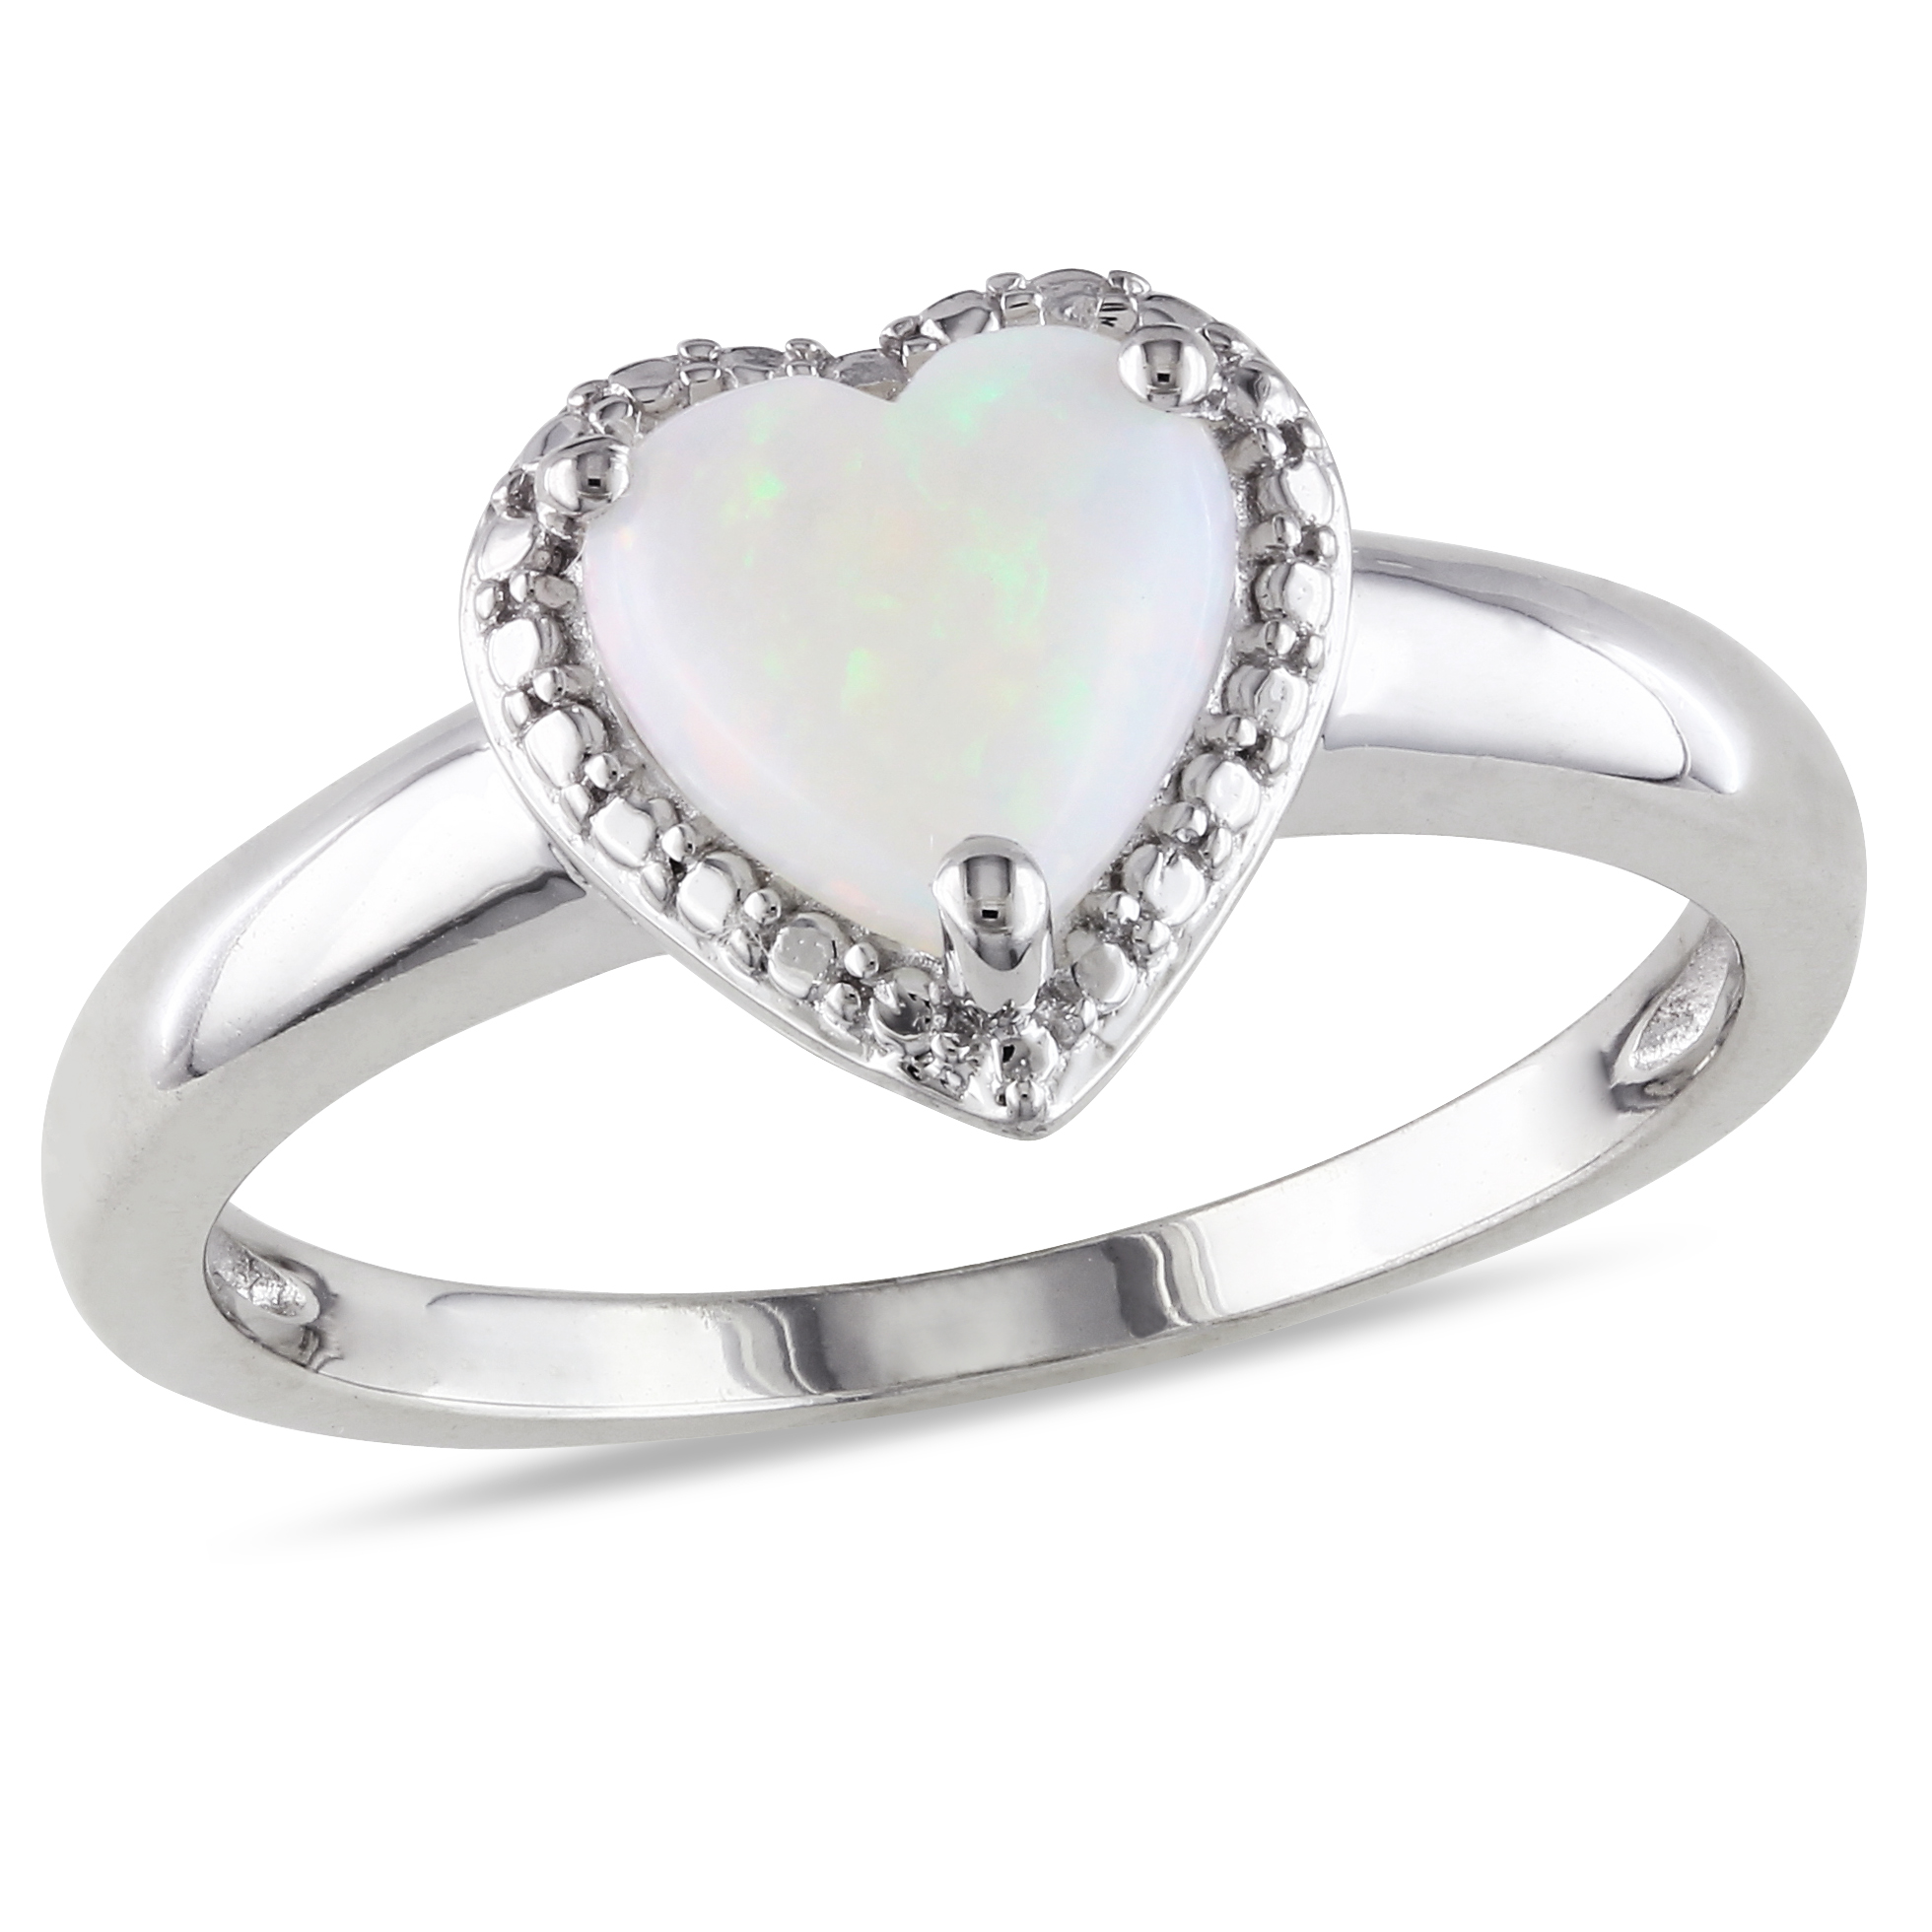 Amour 7/8 Carat T.G.W. Opal Fashion Ring in Sterling Silver